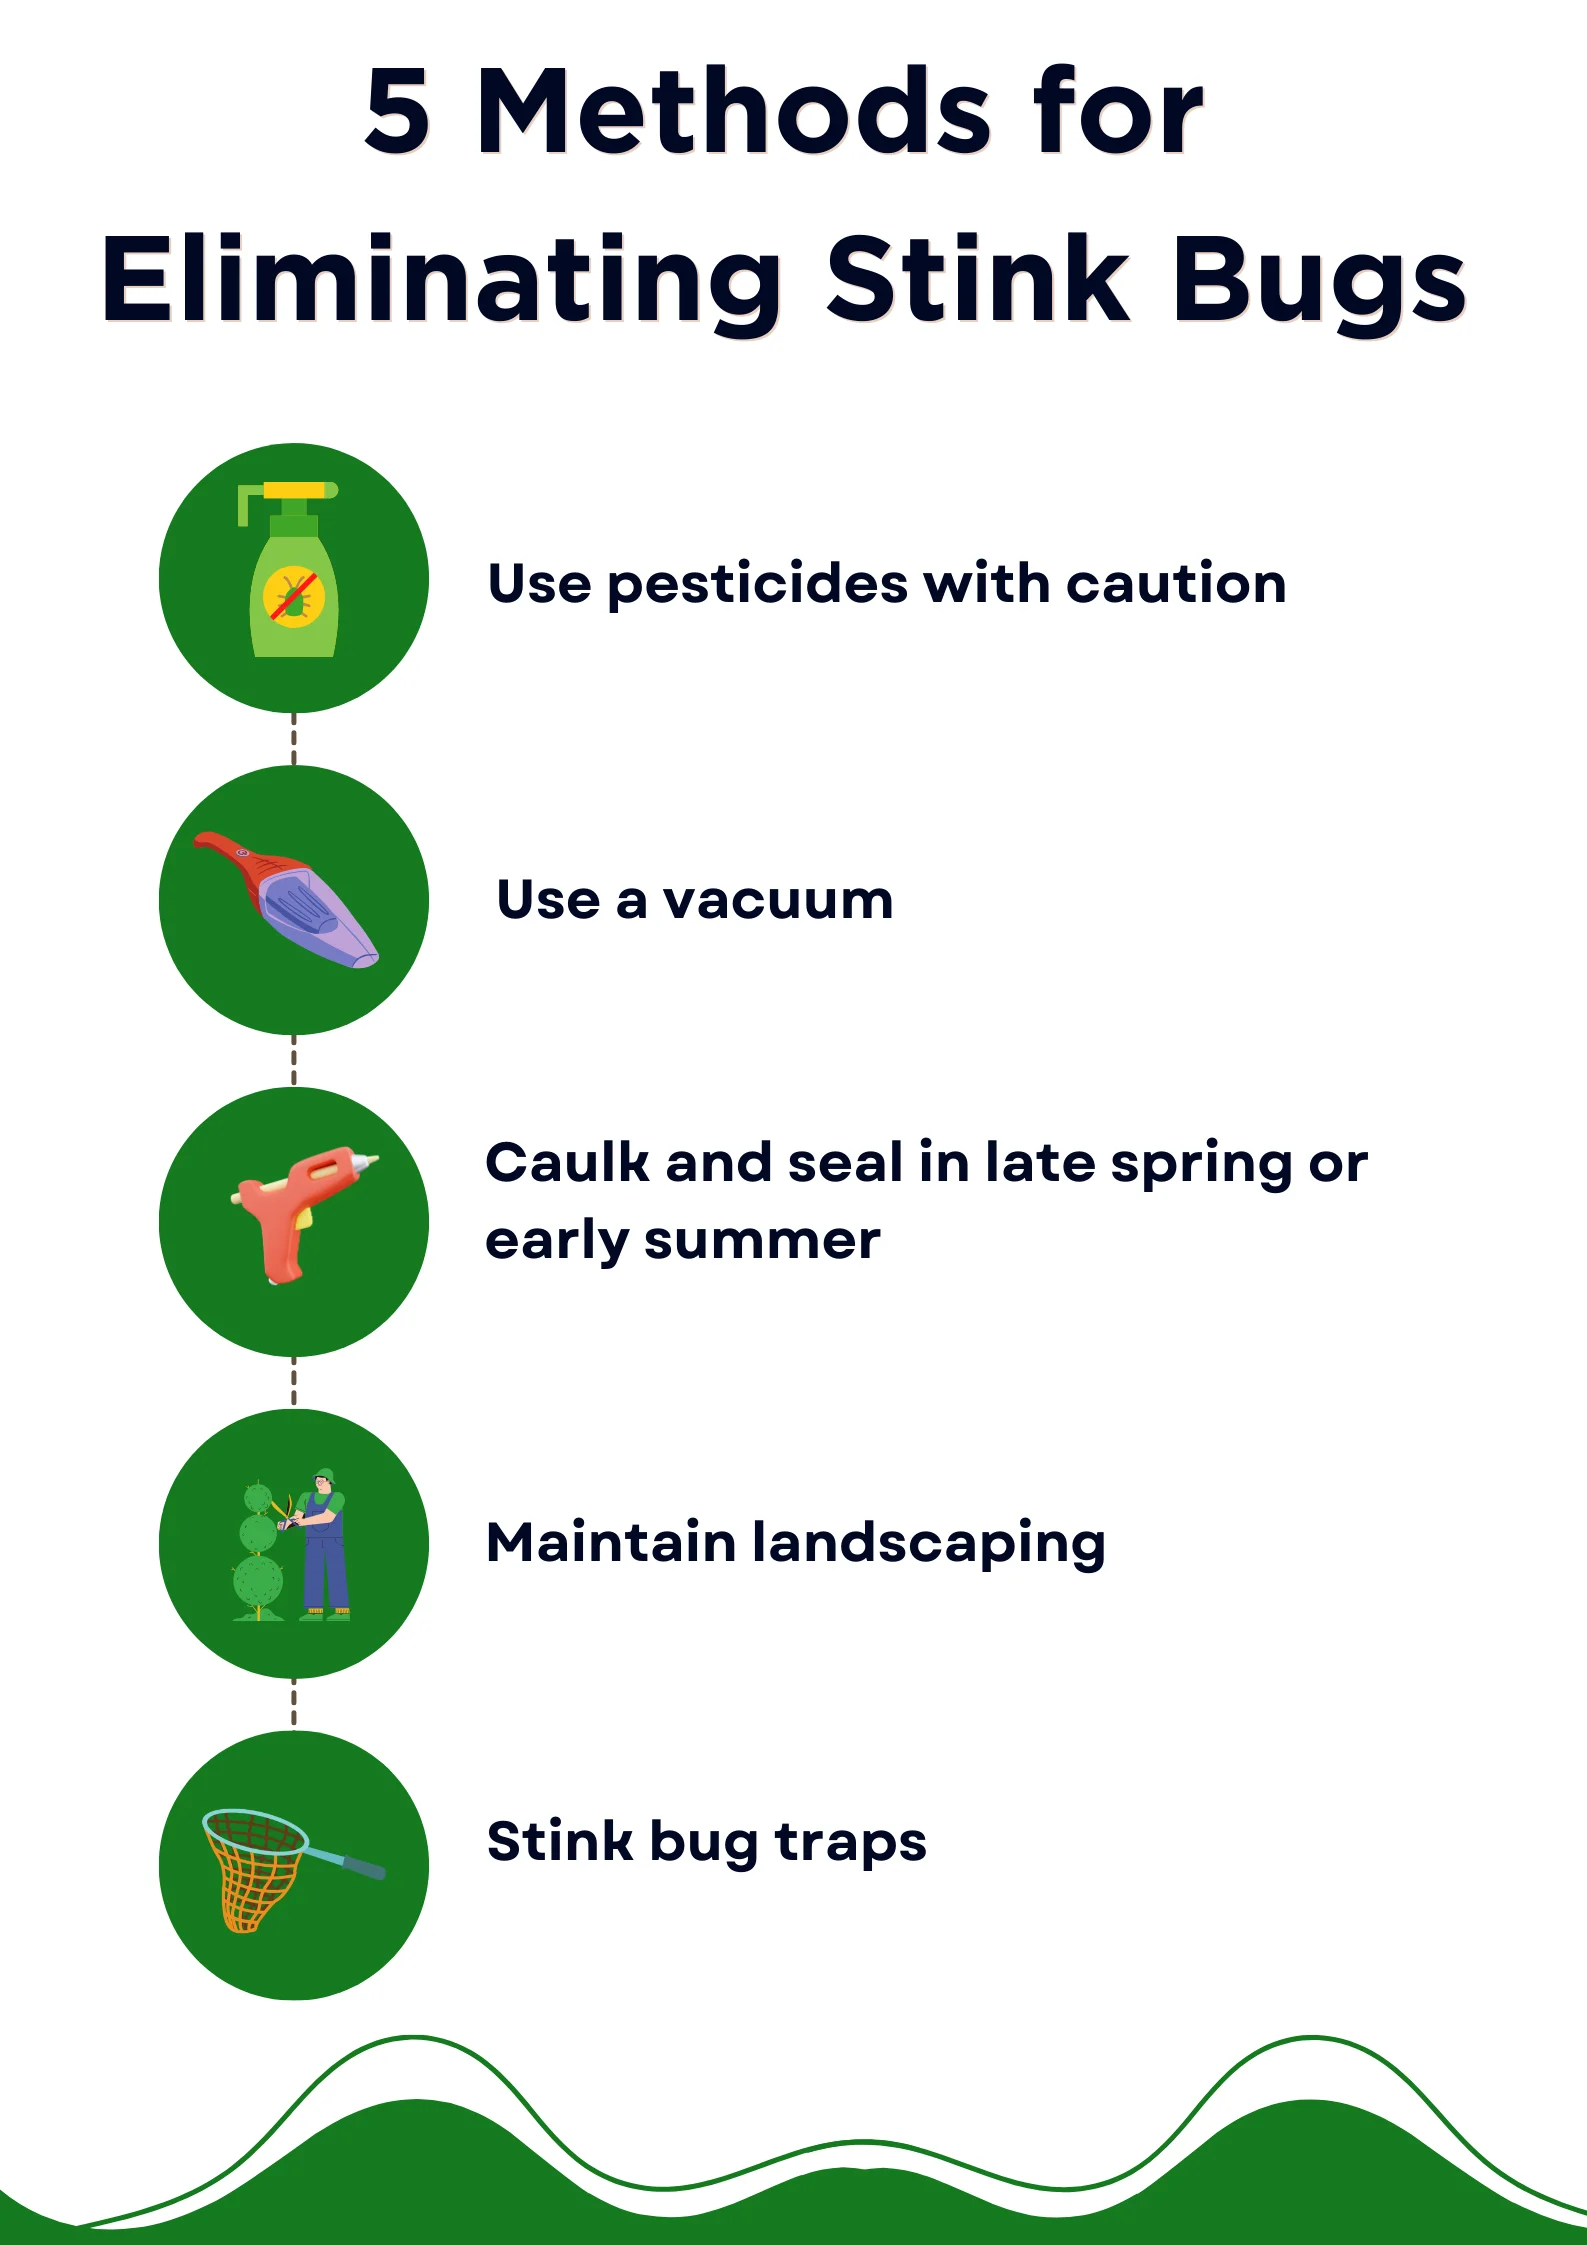 An infographic on the top methods for eliminating stink bugs